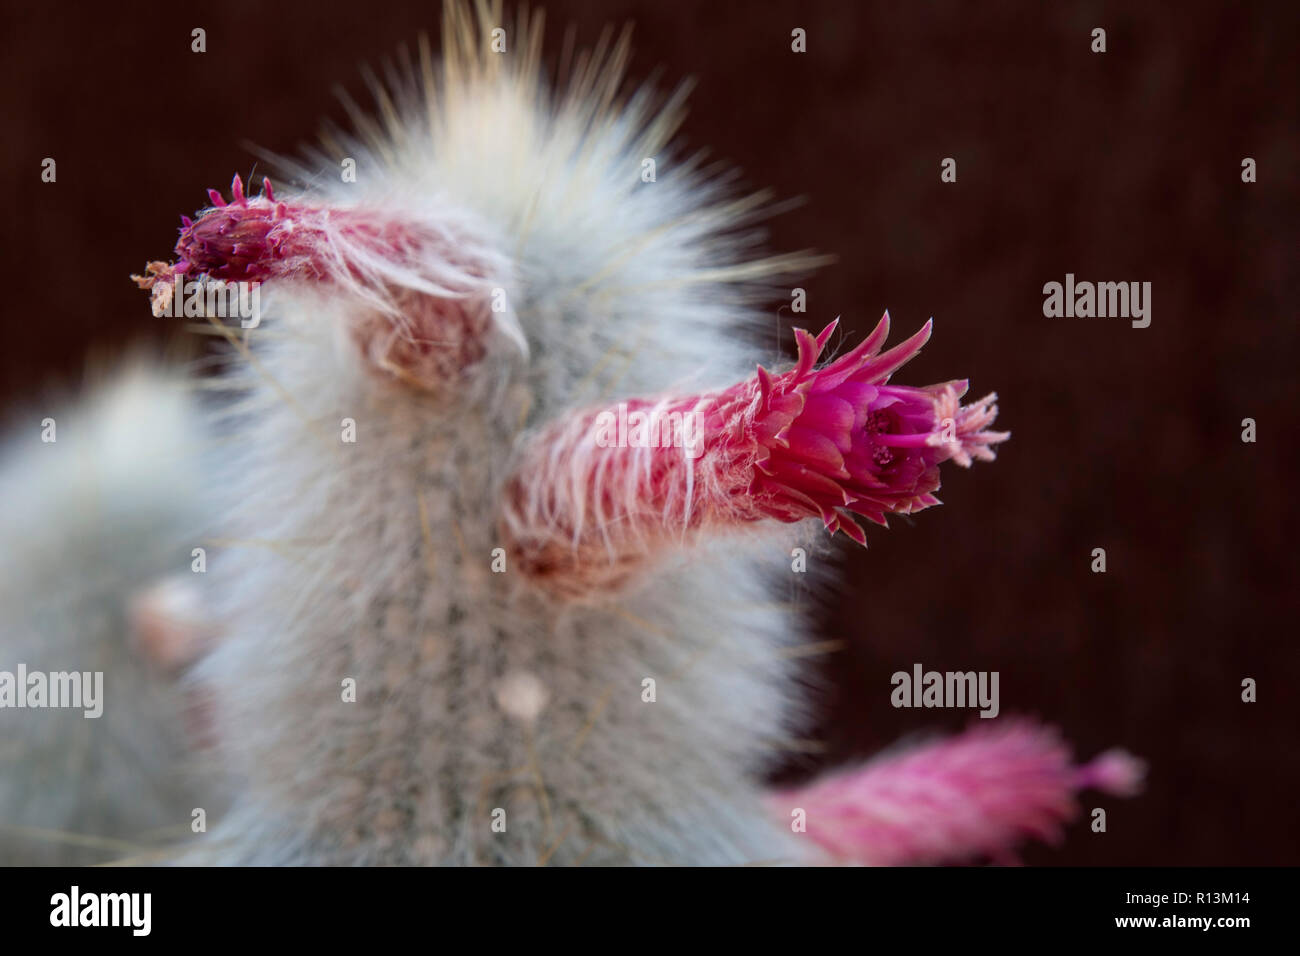 Sydney Australia, silver torch cactus stalk with flowers Stock Photo